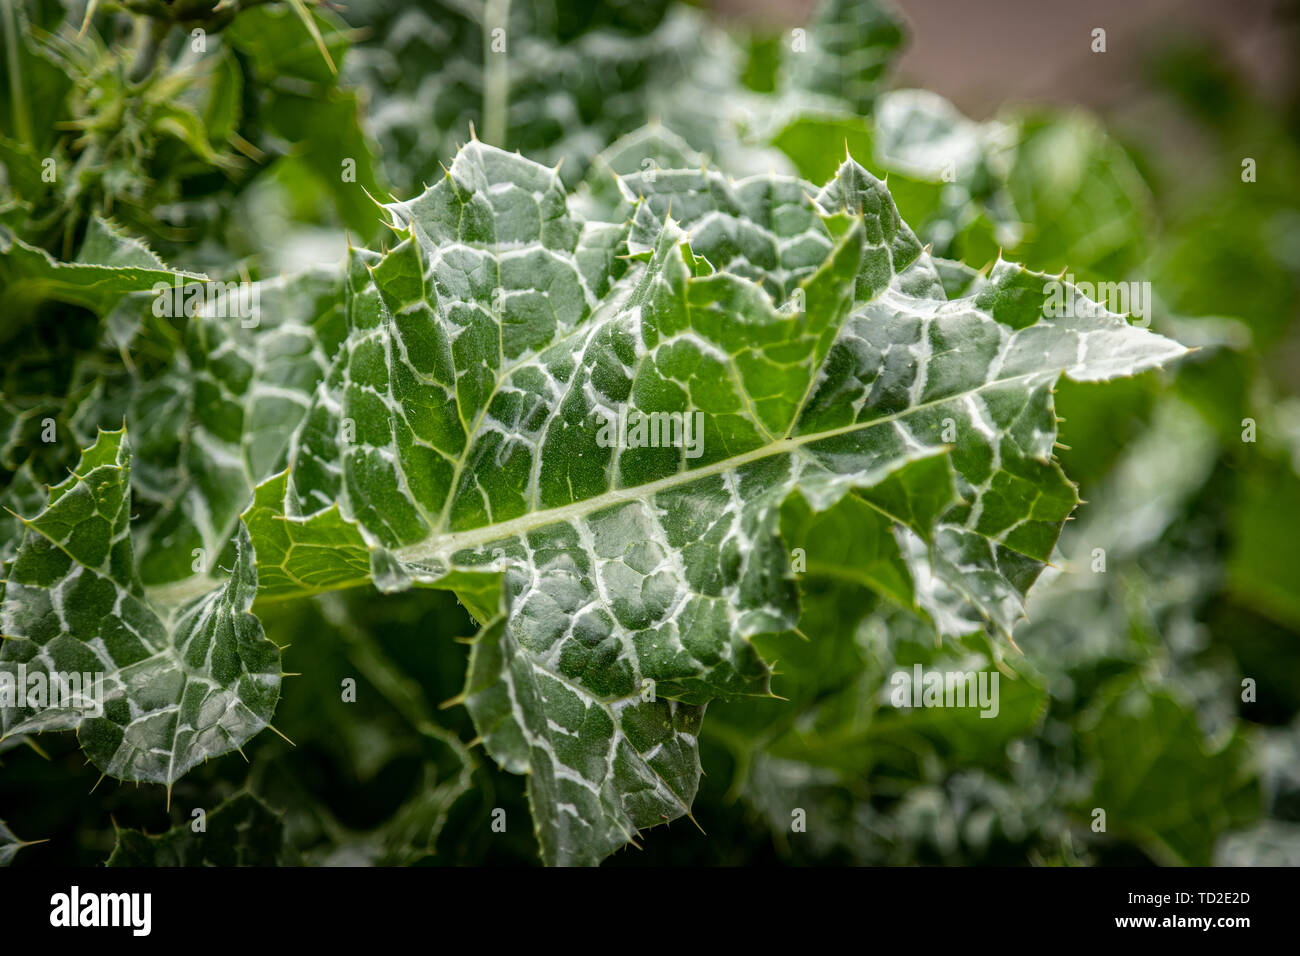 Close up of green and white spiky leaves of a thistle growing in Kew Gardens, London. Stock Photo